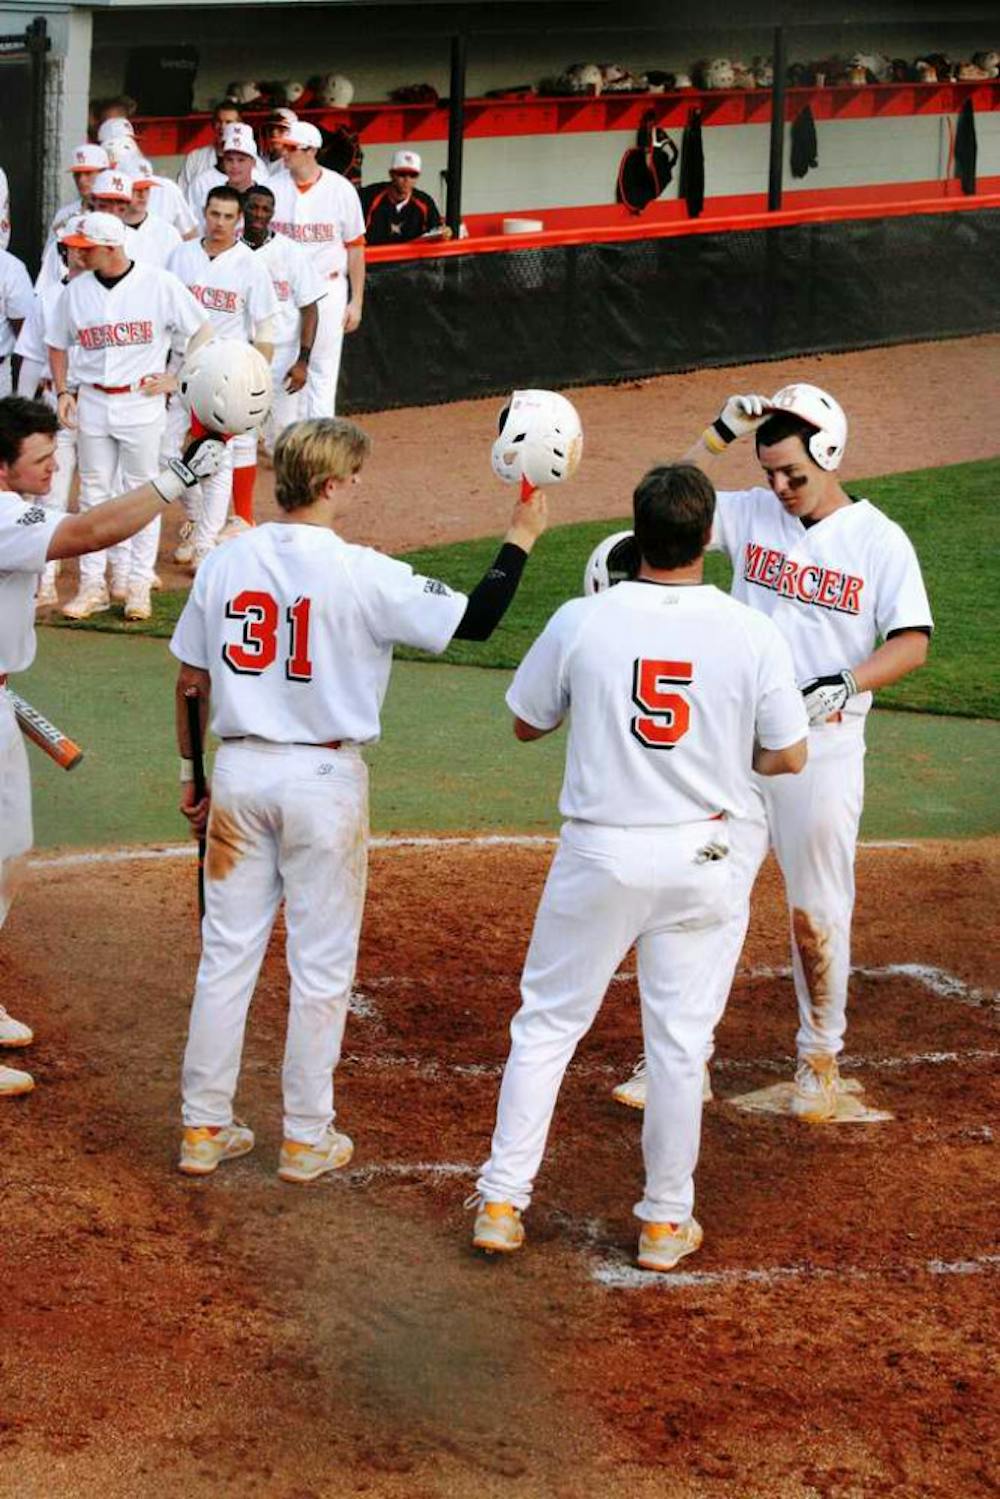 (Alex Lockwood / Cluster Staff) Joe Winker (far right) receives a tip of the cap from his teammates after a three homerun game against Liberty this past weekend.